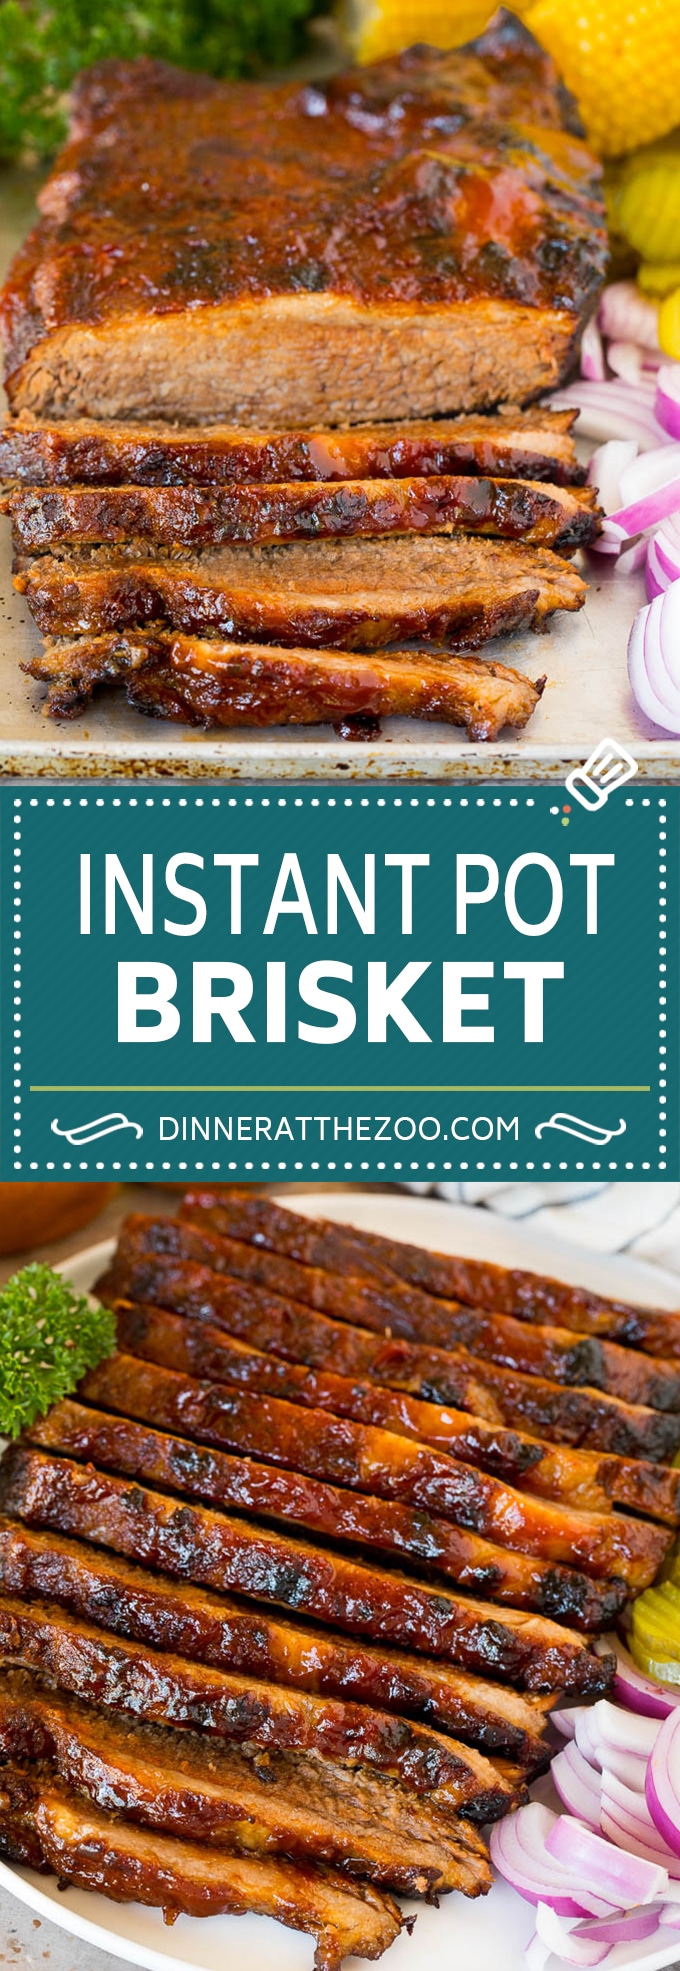 This Instant Pot brisket is beef coated in a homemade spice rub, then pressure cooked with BBQ sauce until perfectly tender.